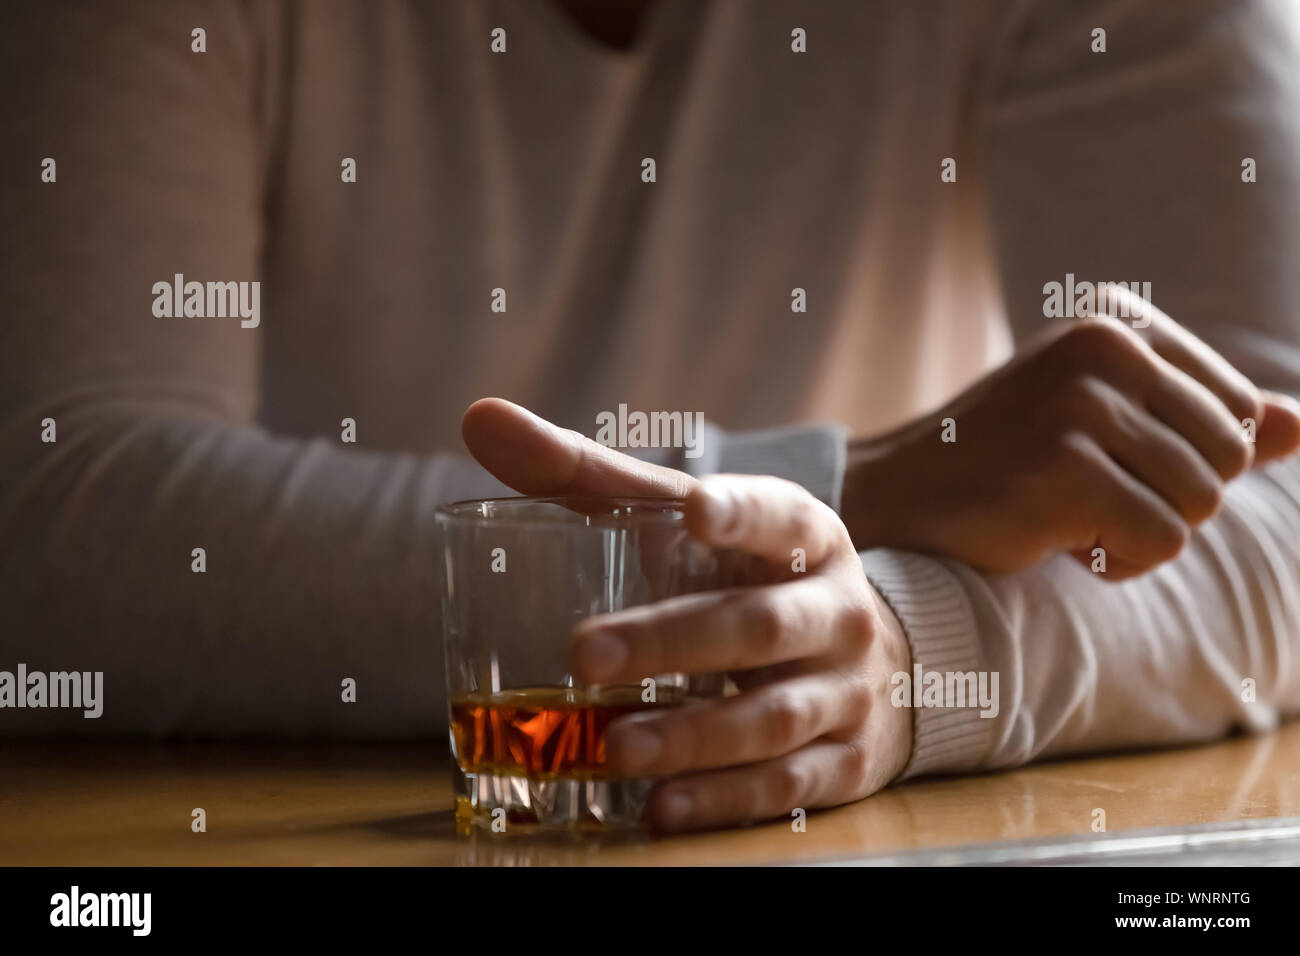 Close up man holding glass with alcohol in hand, drinking alone Stock Photo